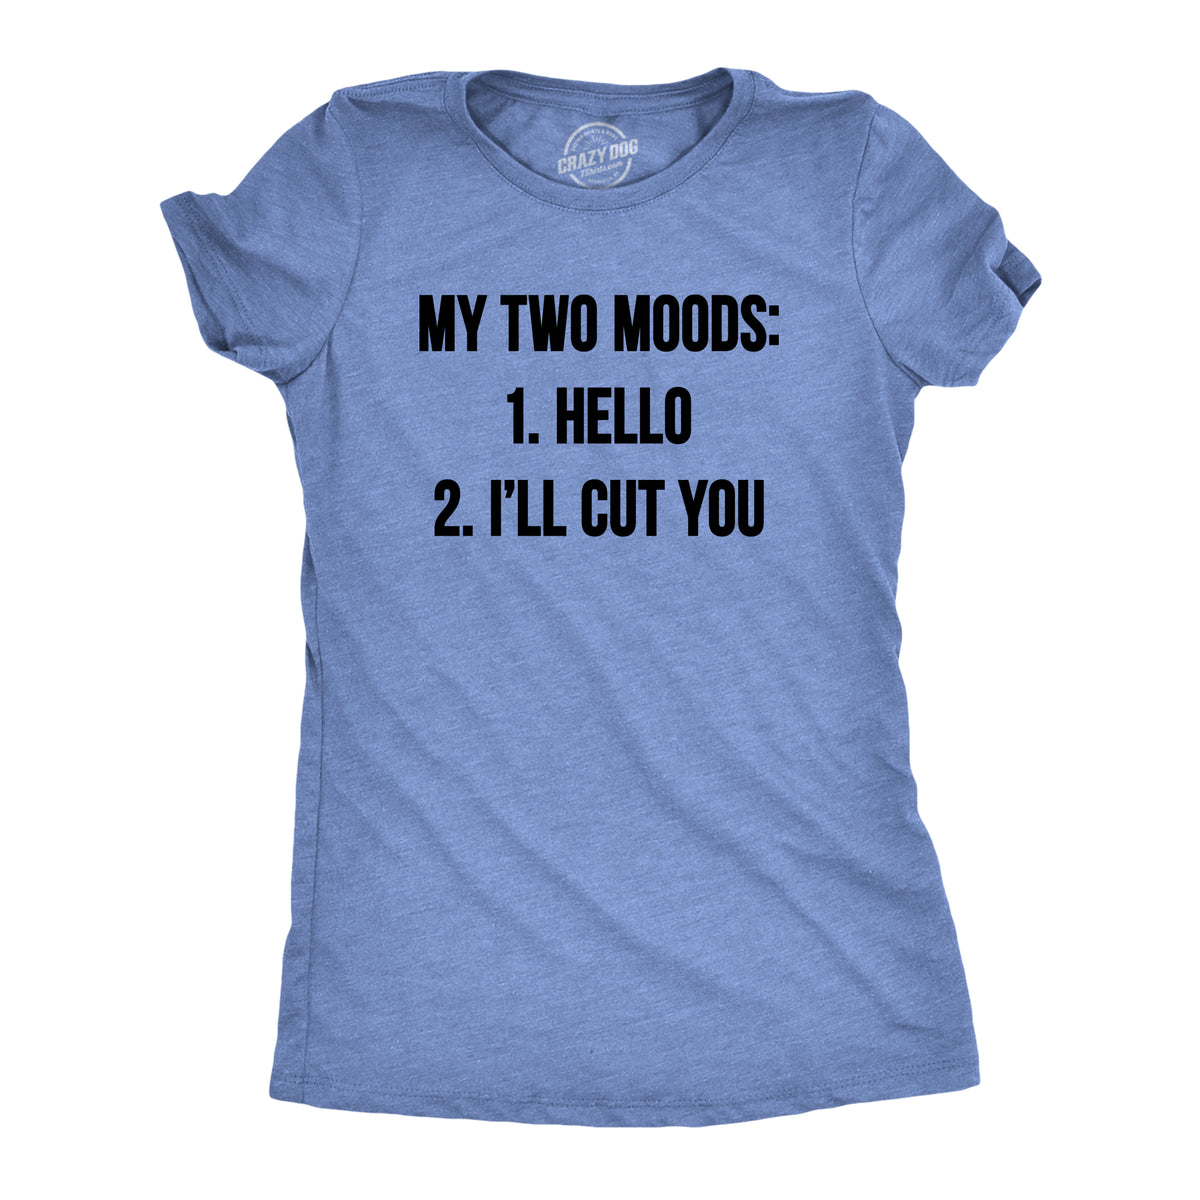 Funny Heather Light Blue My Two Moods Womens T Shirt Nerdy Introvert Tee